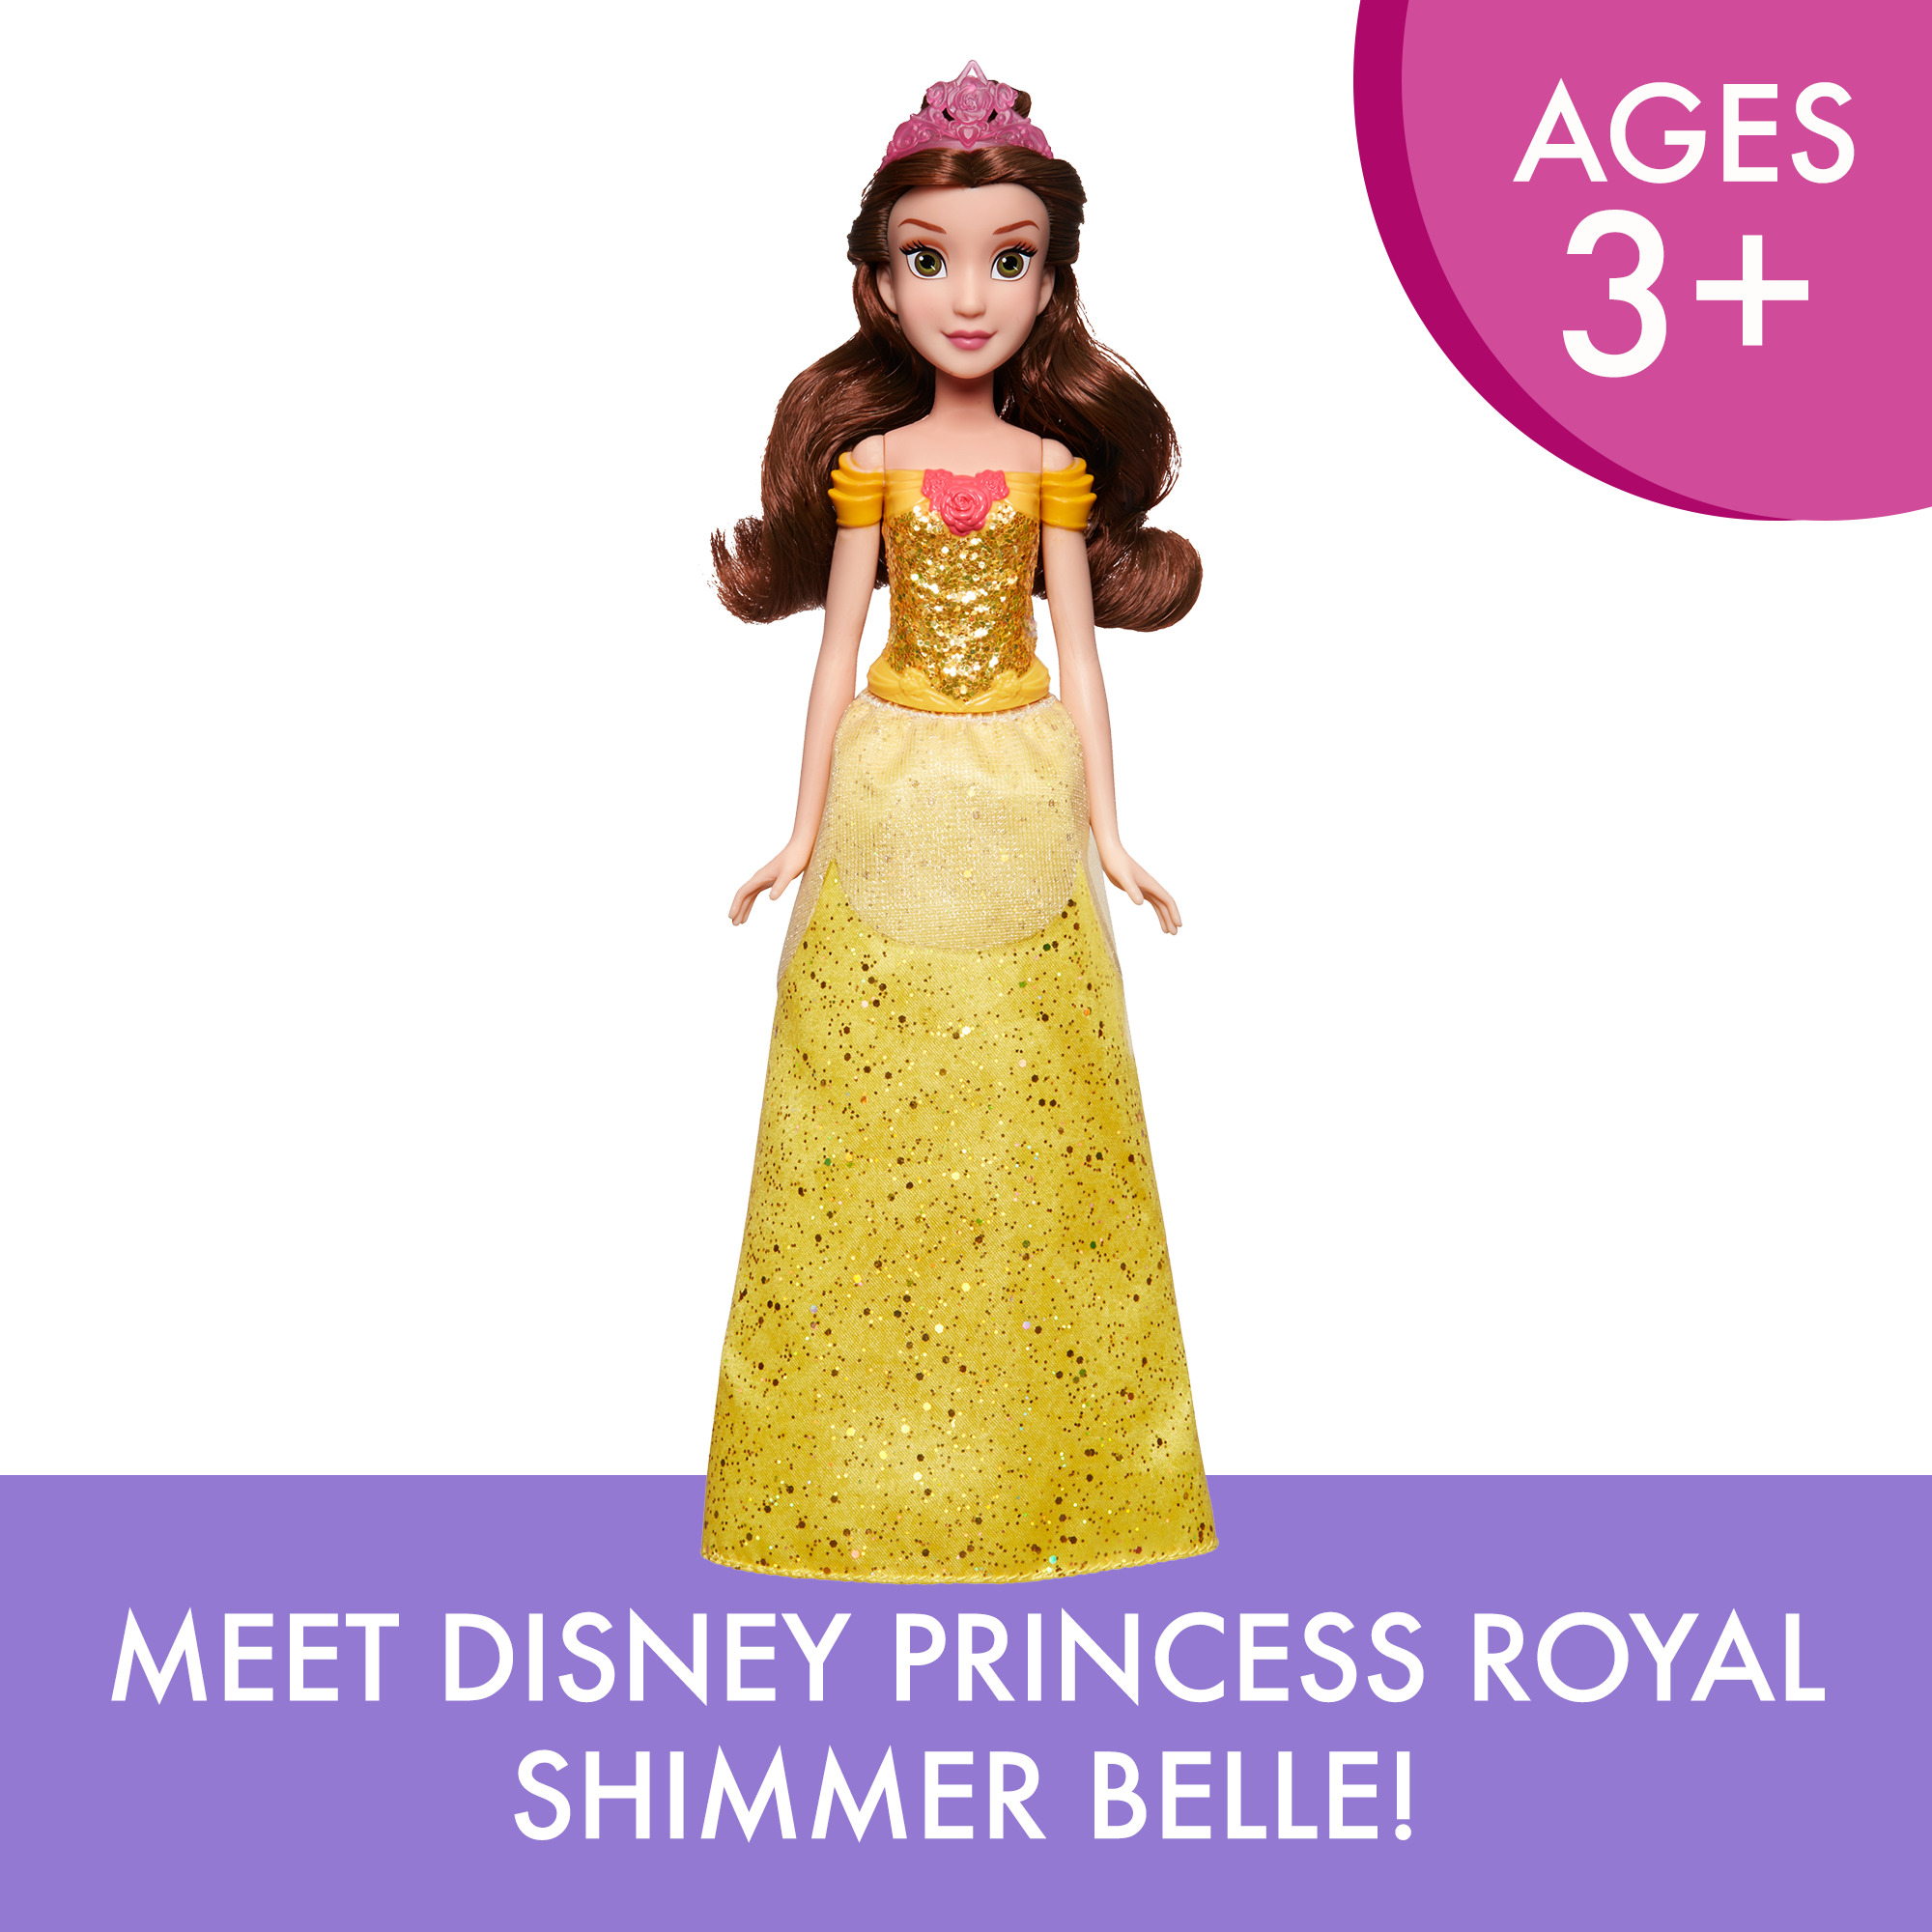 Disney Princess Royal Shimmer Belle with Sparkly Skirt, Includes Tiara and Shoes - image 5 of 16